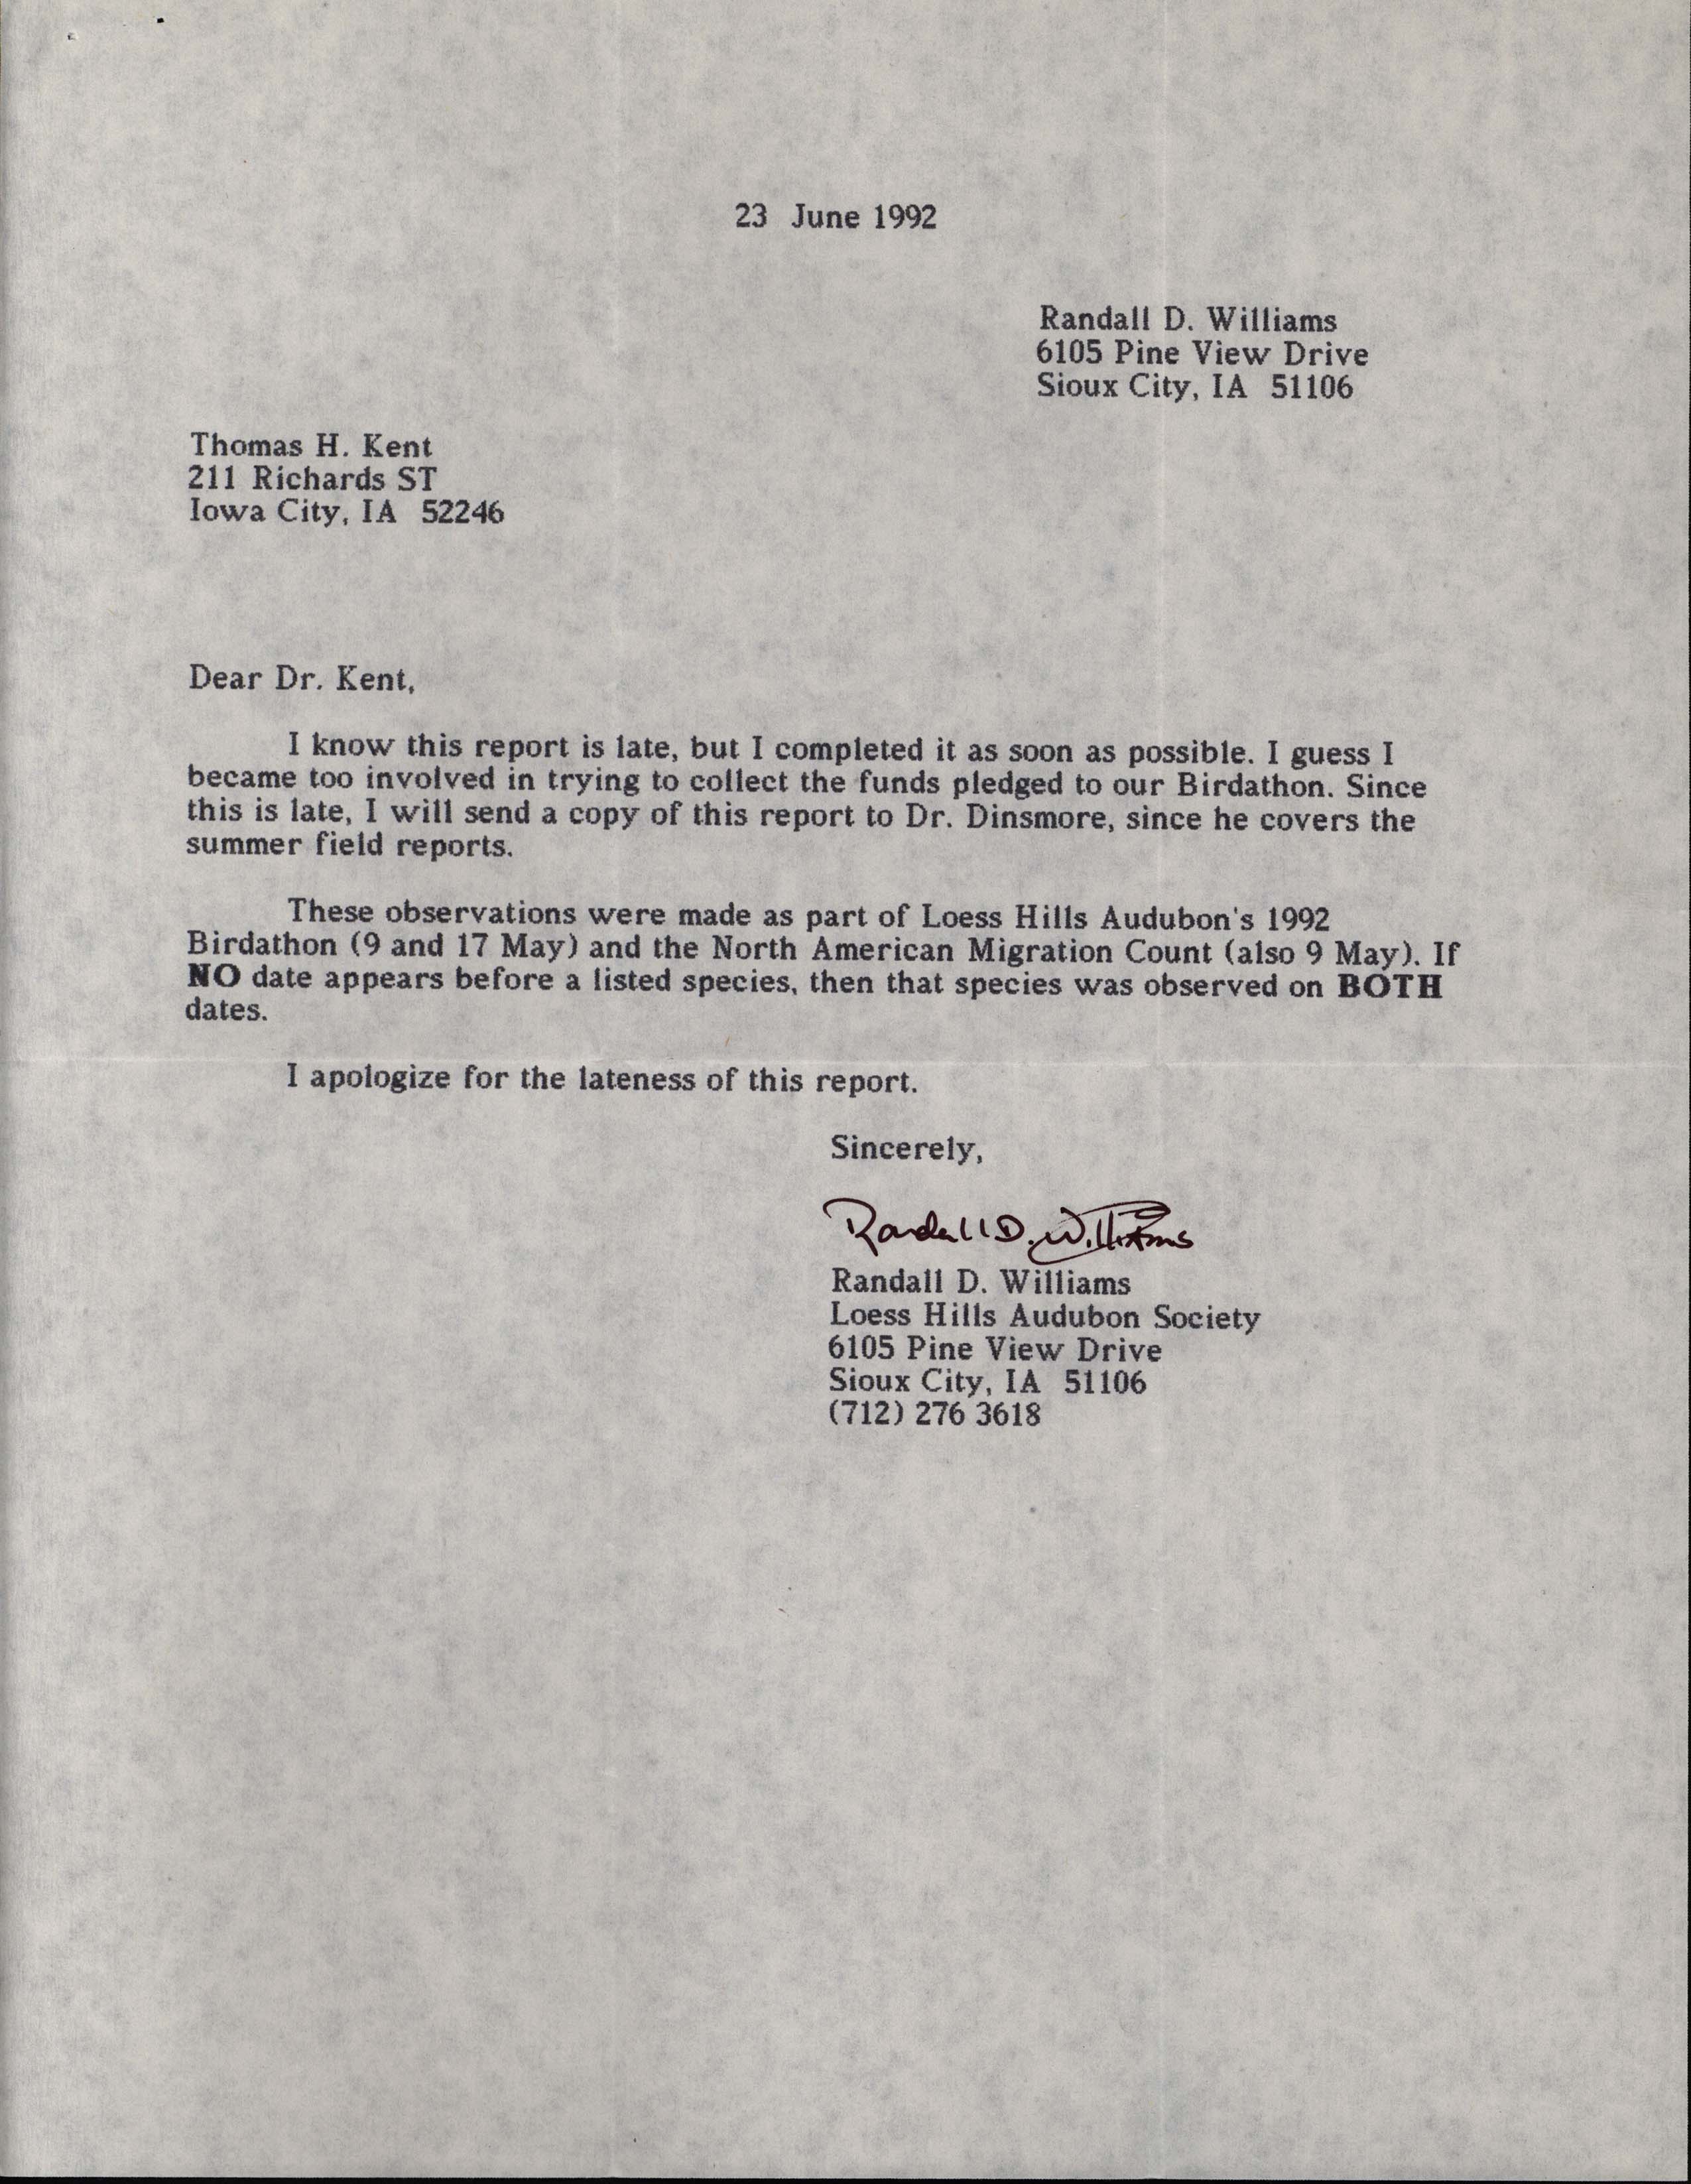 Field notes and Randall D. Williams letter to Thomas H. Kent, June 23, 1992